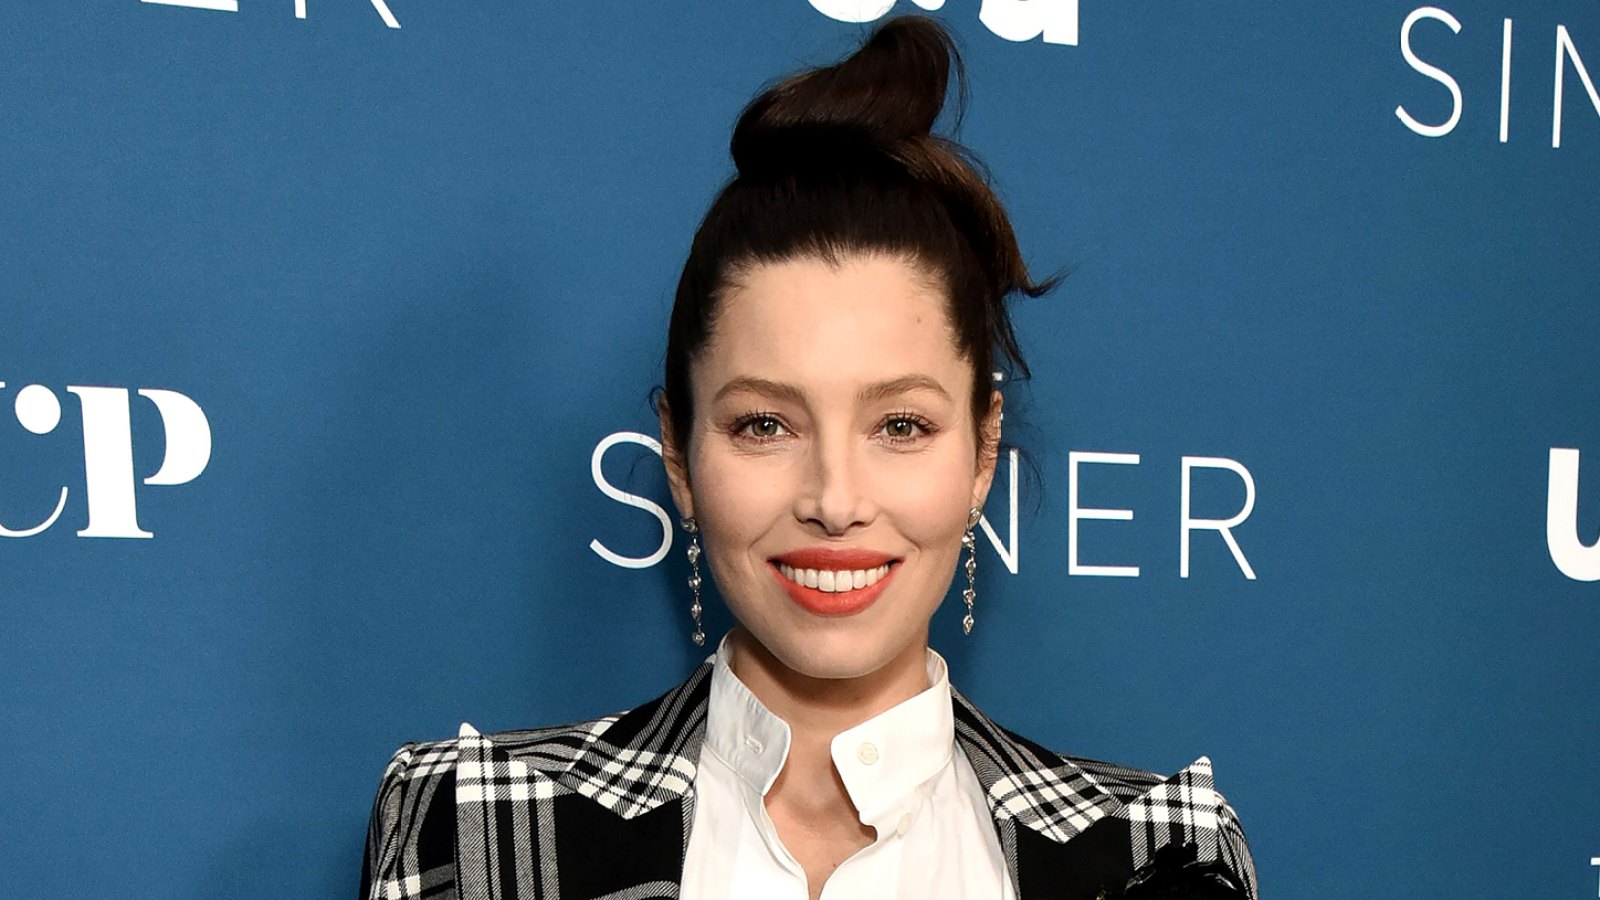 Jessica Biel Says Son Silas Is ‘Covered’ in Birthday Cake in Sweet Tribute as He Turns 5